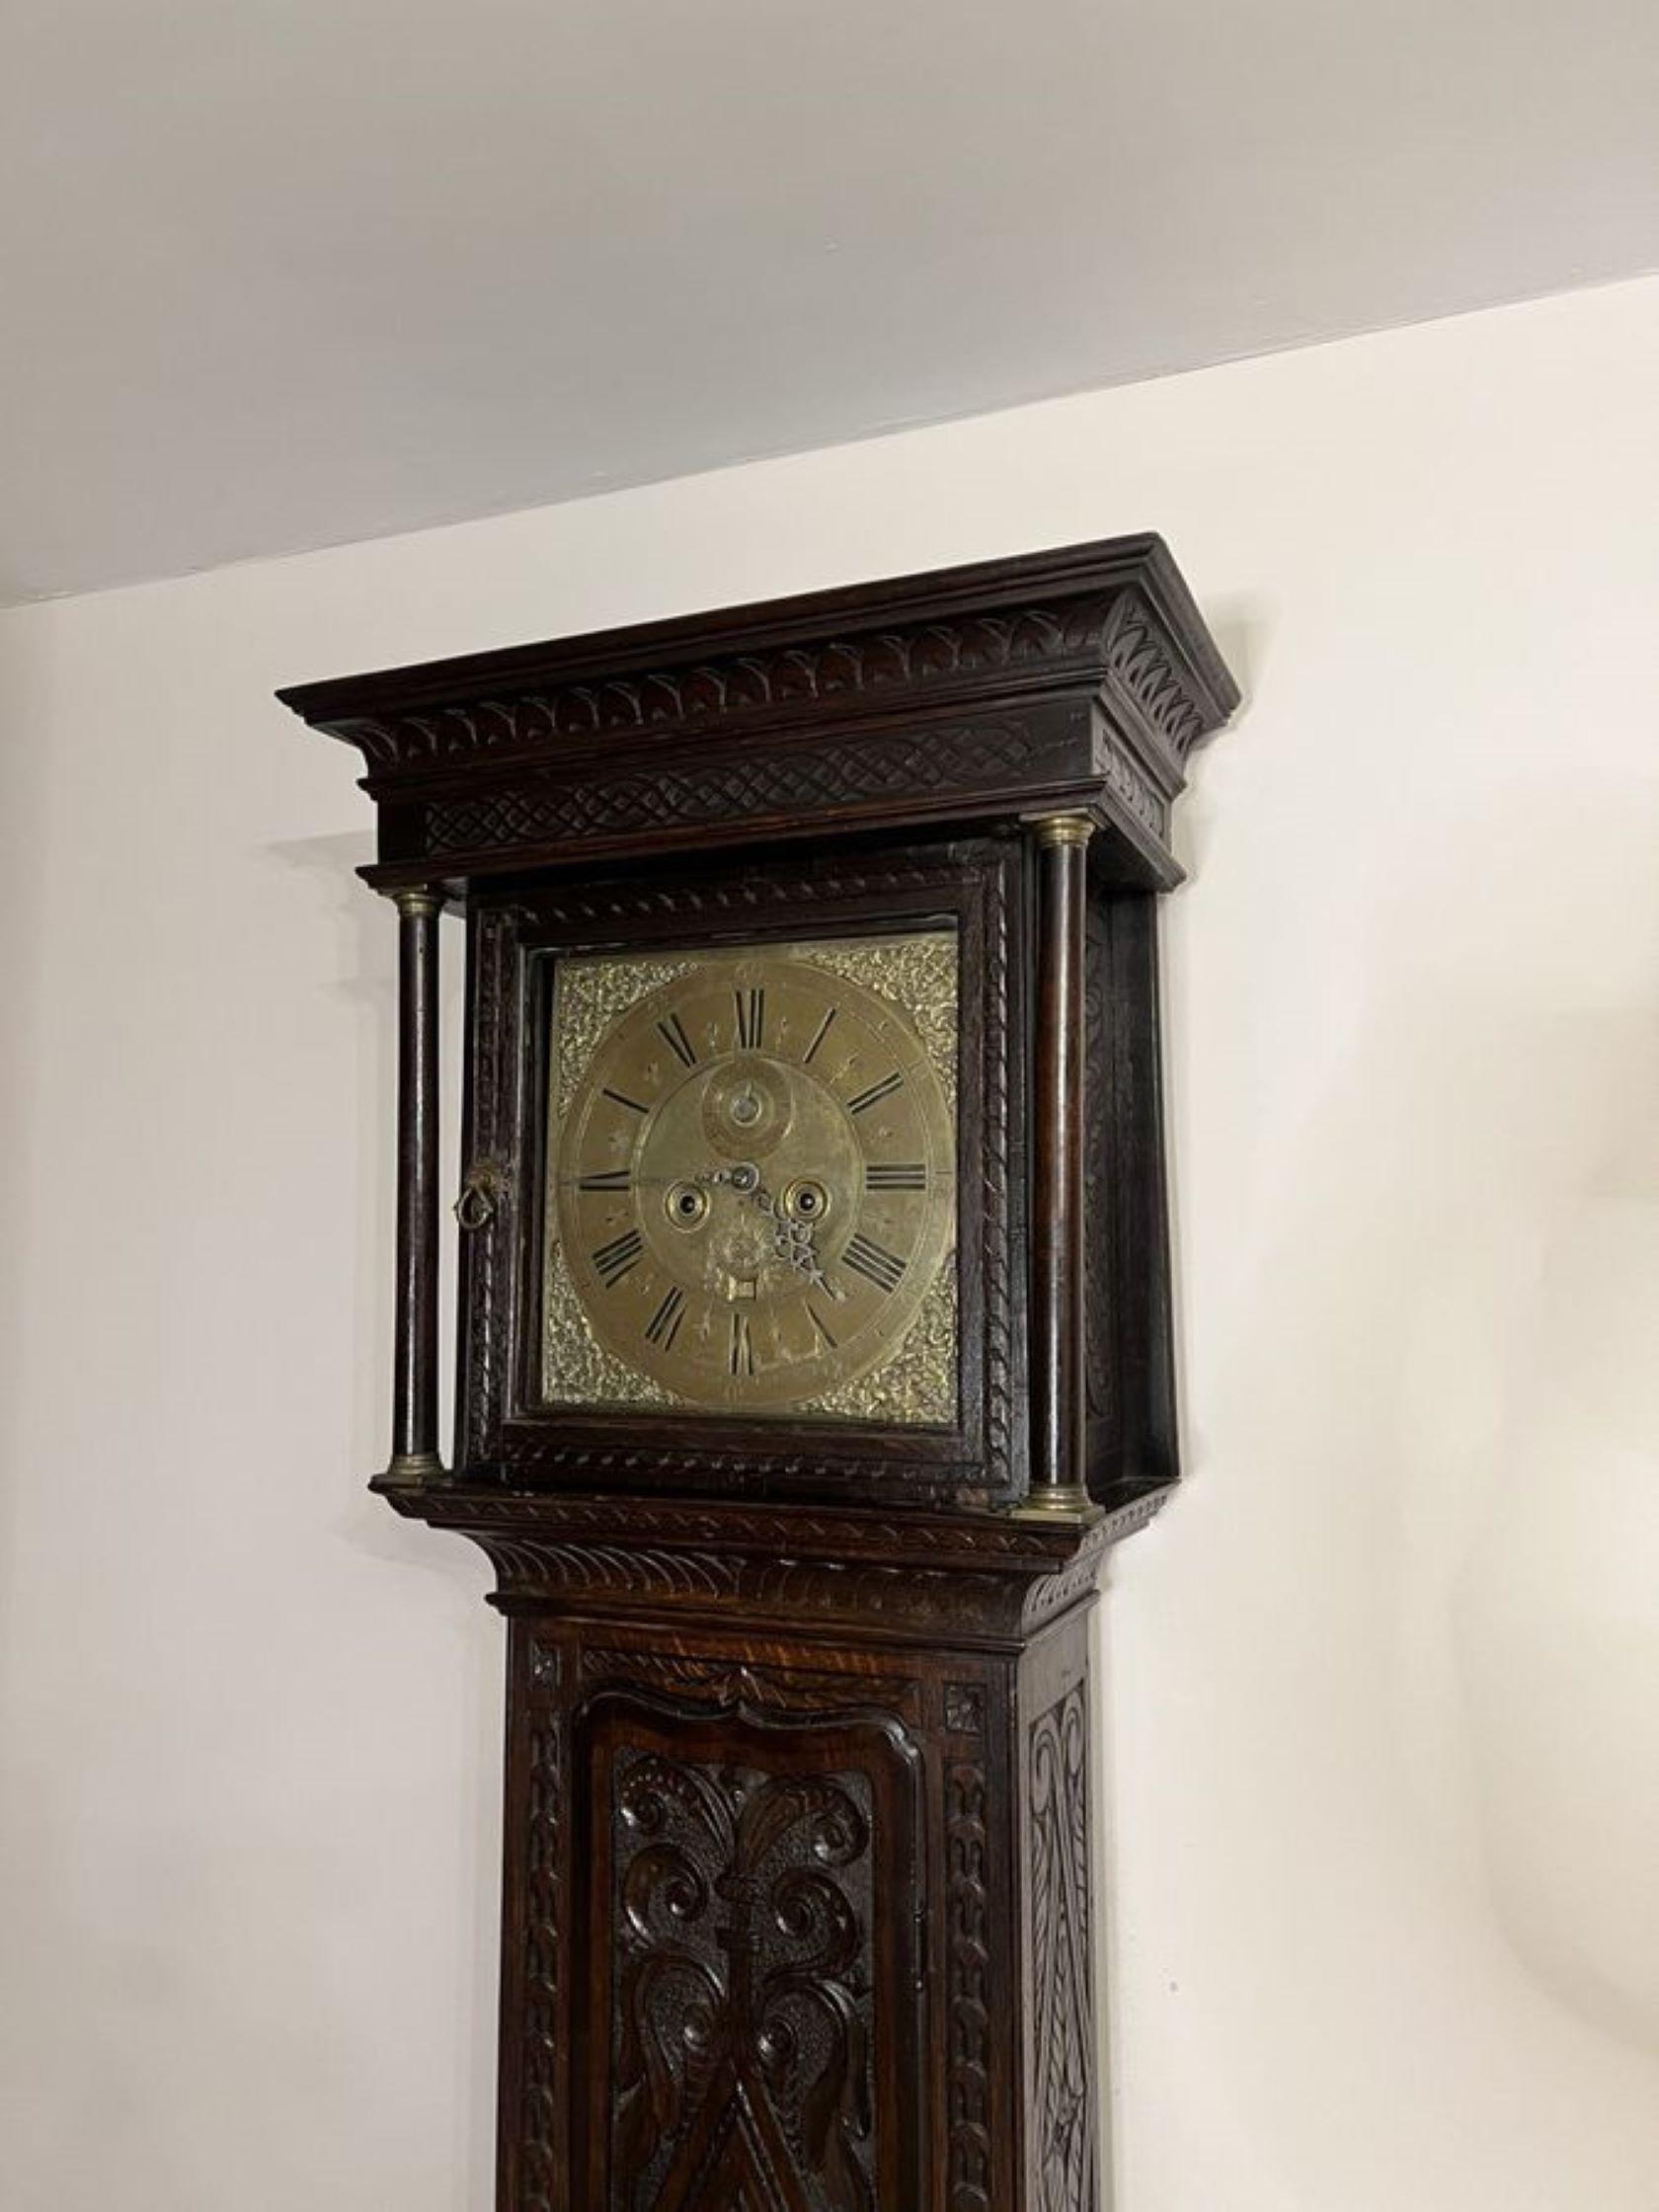 Fantastic quality antique George III carved oak long case clock, having an 8 day movement striking on a bell, with a brass dial the chapter ring inscribed Thomas Wentworth JNR, having a secondary minute hand and a calendar wheel with a fantastic